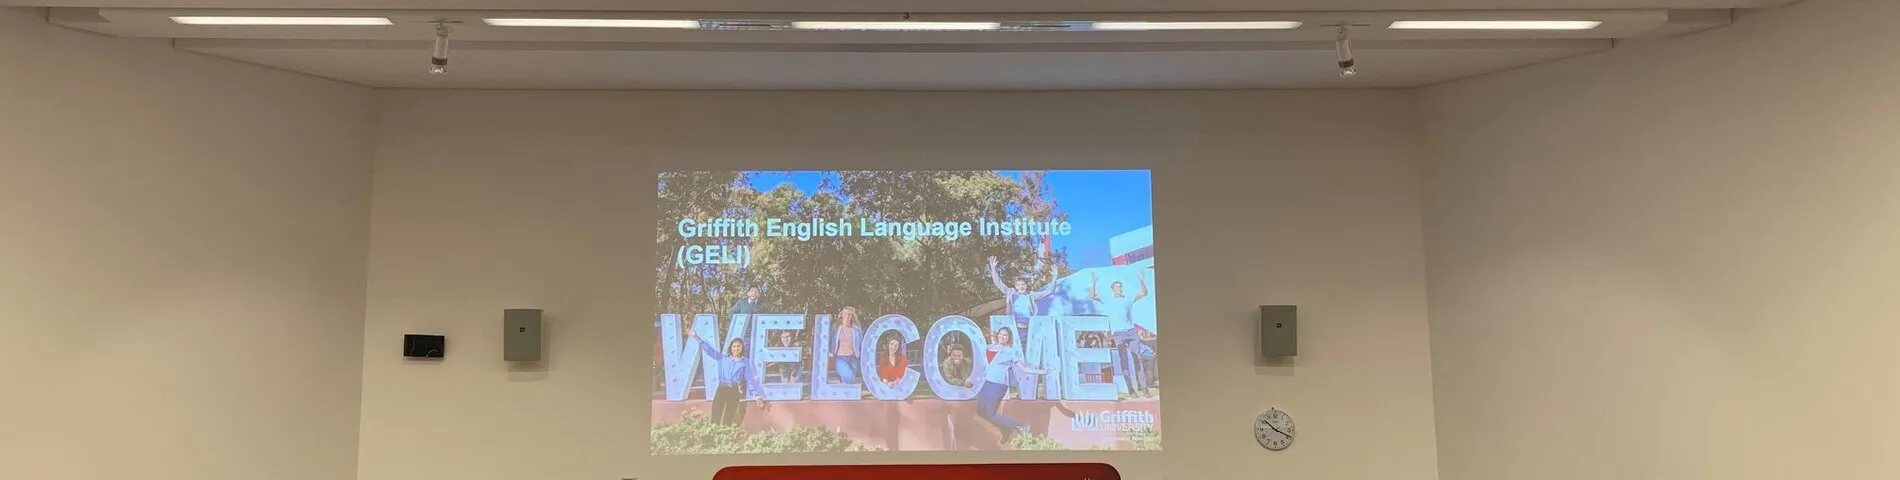 Griffith English Language Institute 사진 1